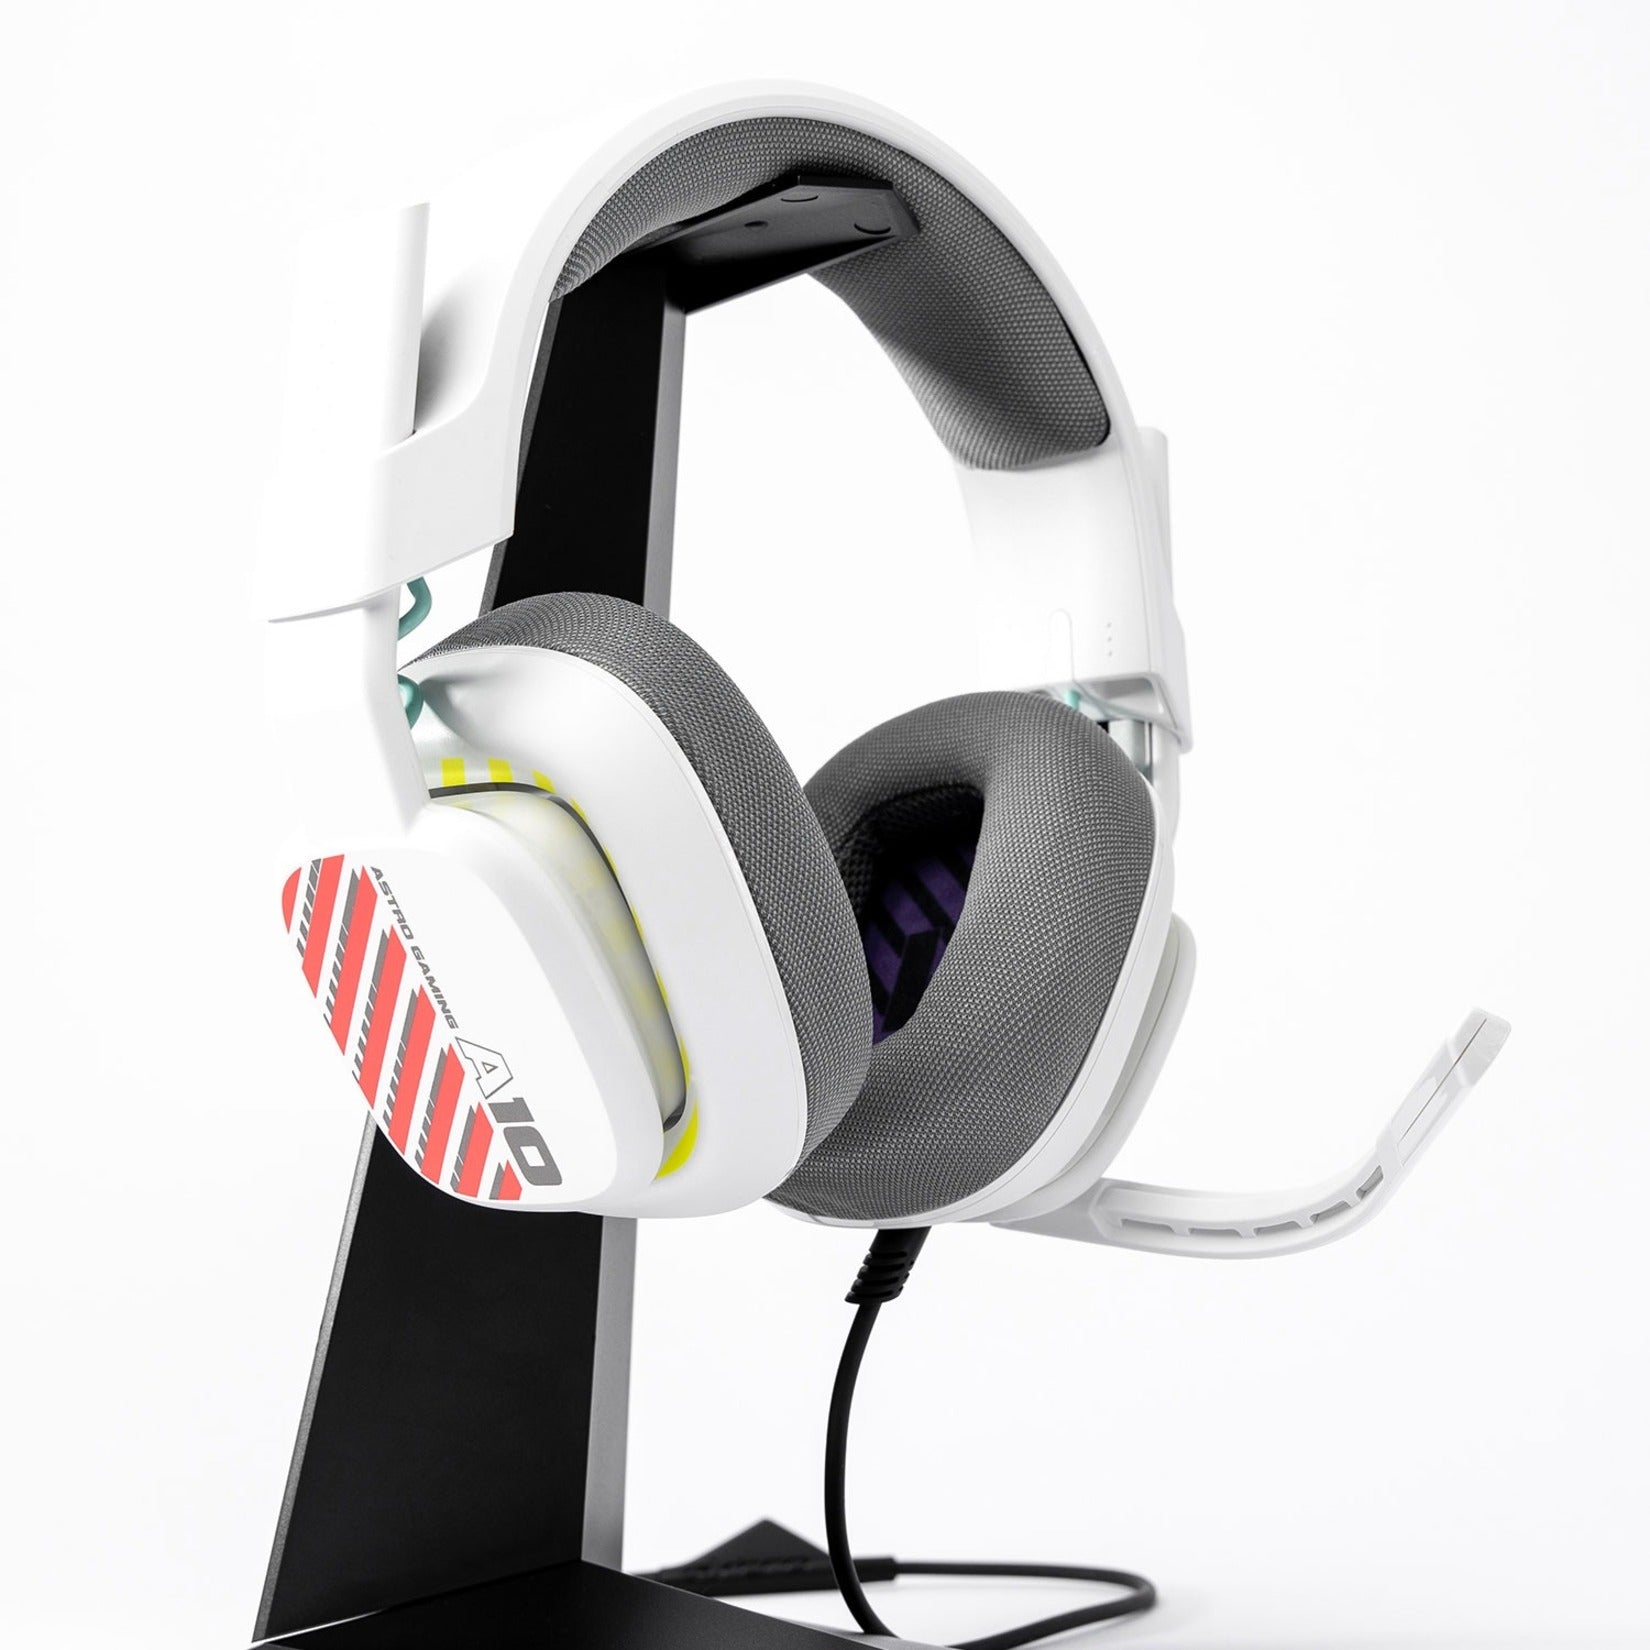 Astro 939-002062 A10 Headset Playstation - White, 2 Year Warranty, Uni-directional Microphone